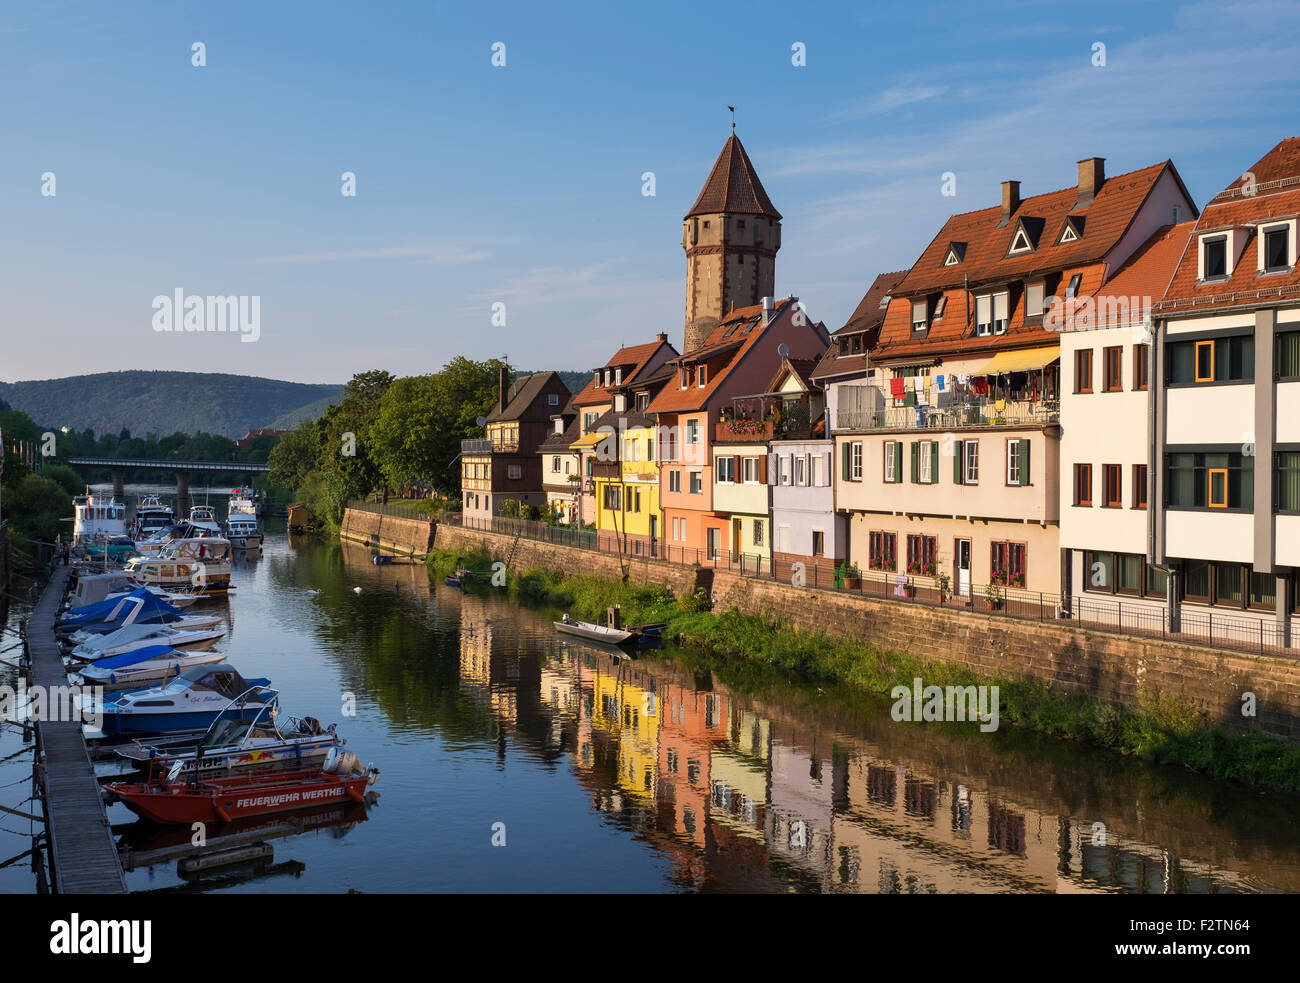 Tauber River and Spitzer Turm tower, Wertheim, Baden-Württemberg, Germany Stock Photo